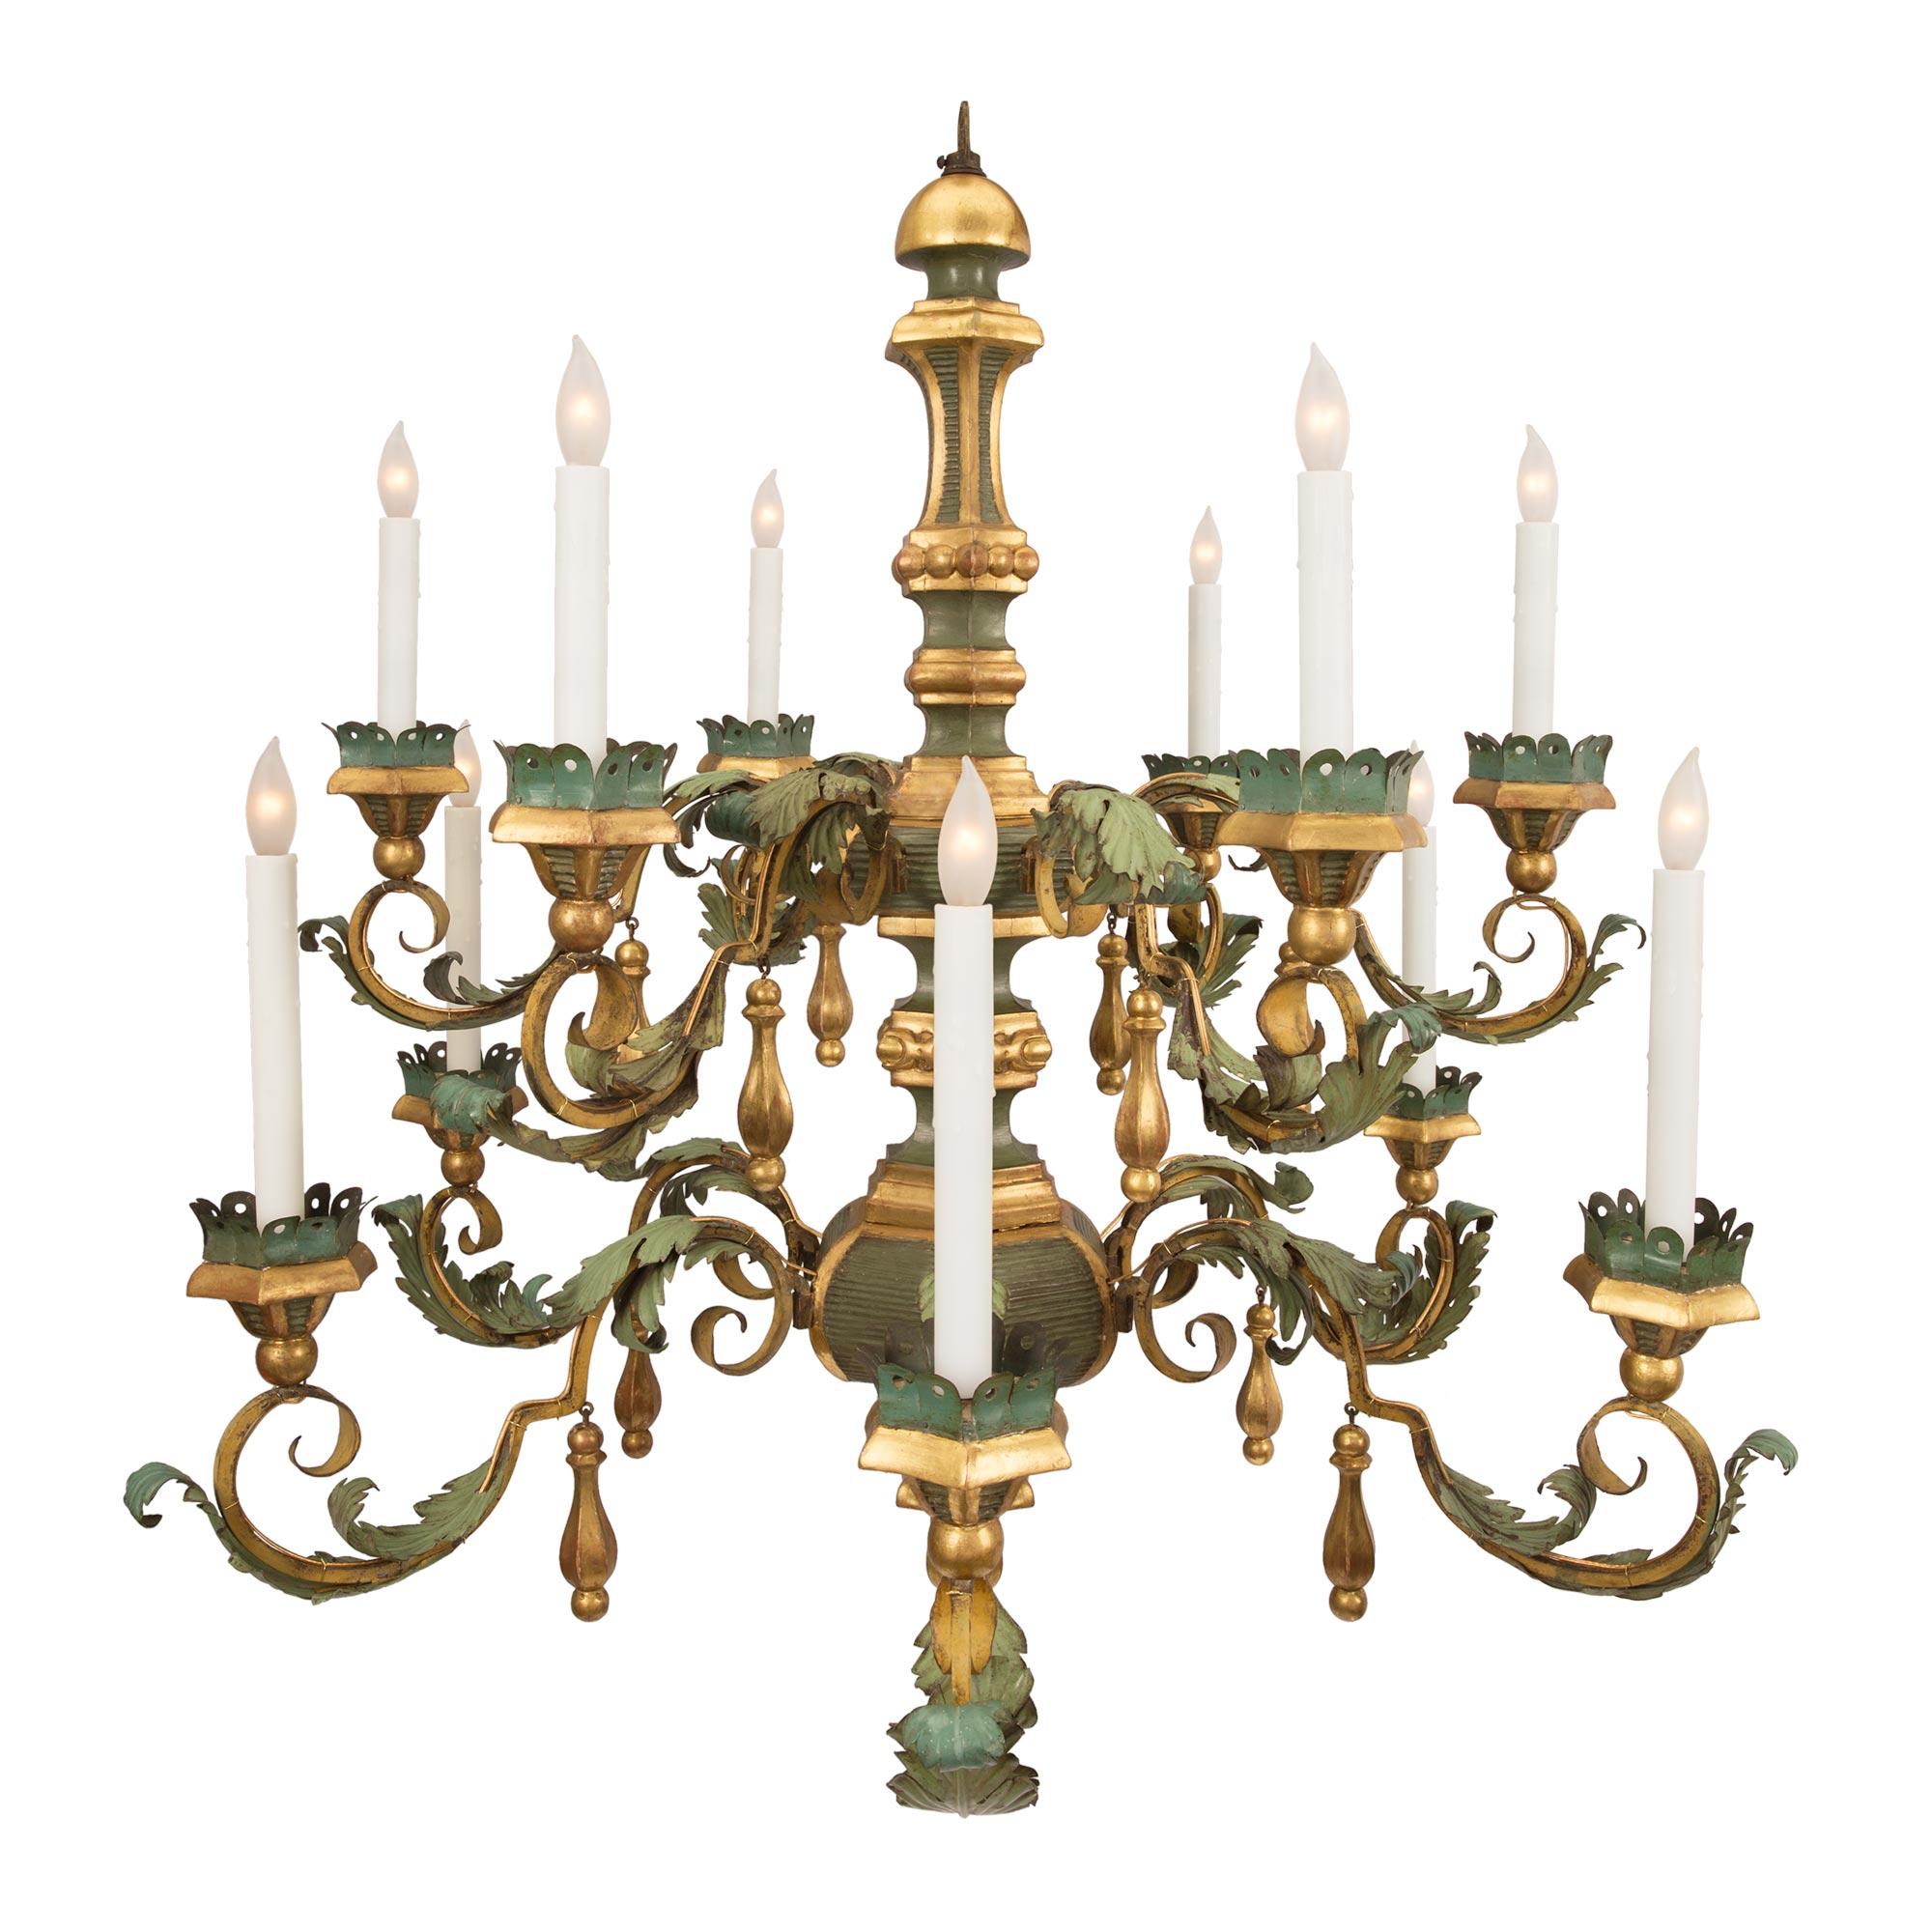 An exceptional and most unique Italian 18th century Tuscan twelve light patinated tole, giltwood and gilt iron chandelier. The chandelier is centered by a lovely inverted hexagonal giltwood finial below a fine horizontal fluted design. The unique